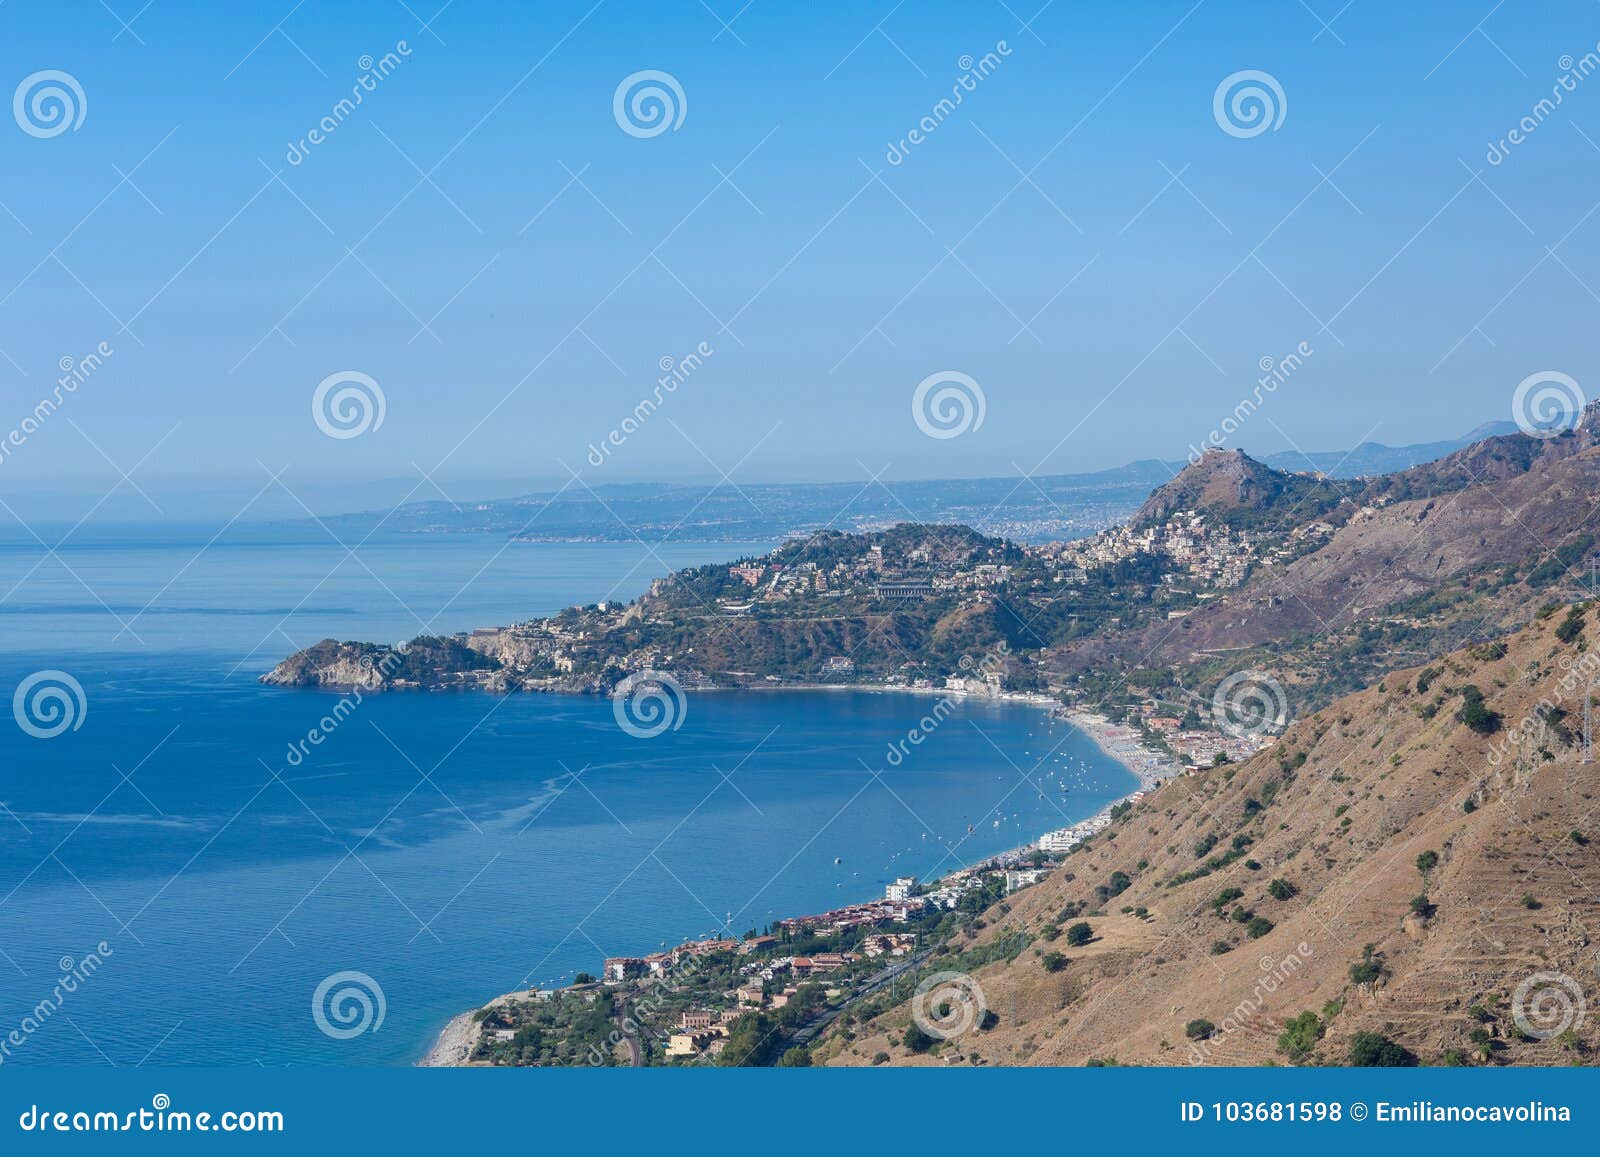 taormina bay in a summer day seen from forza d`agrÃÂ², sicily